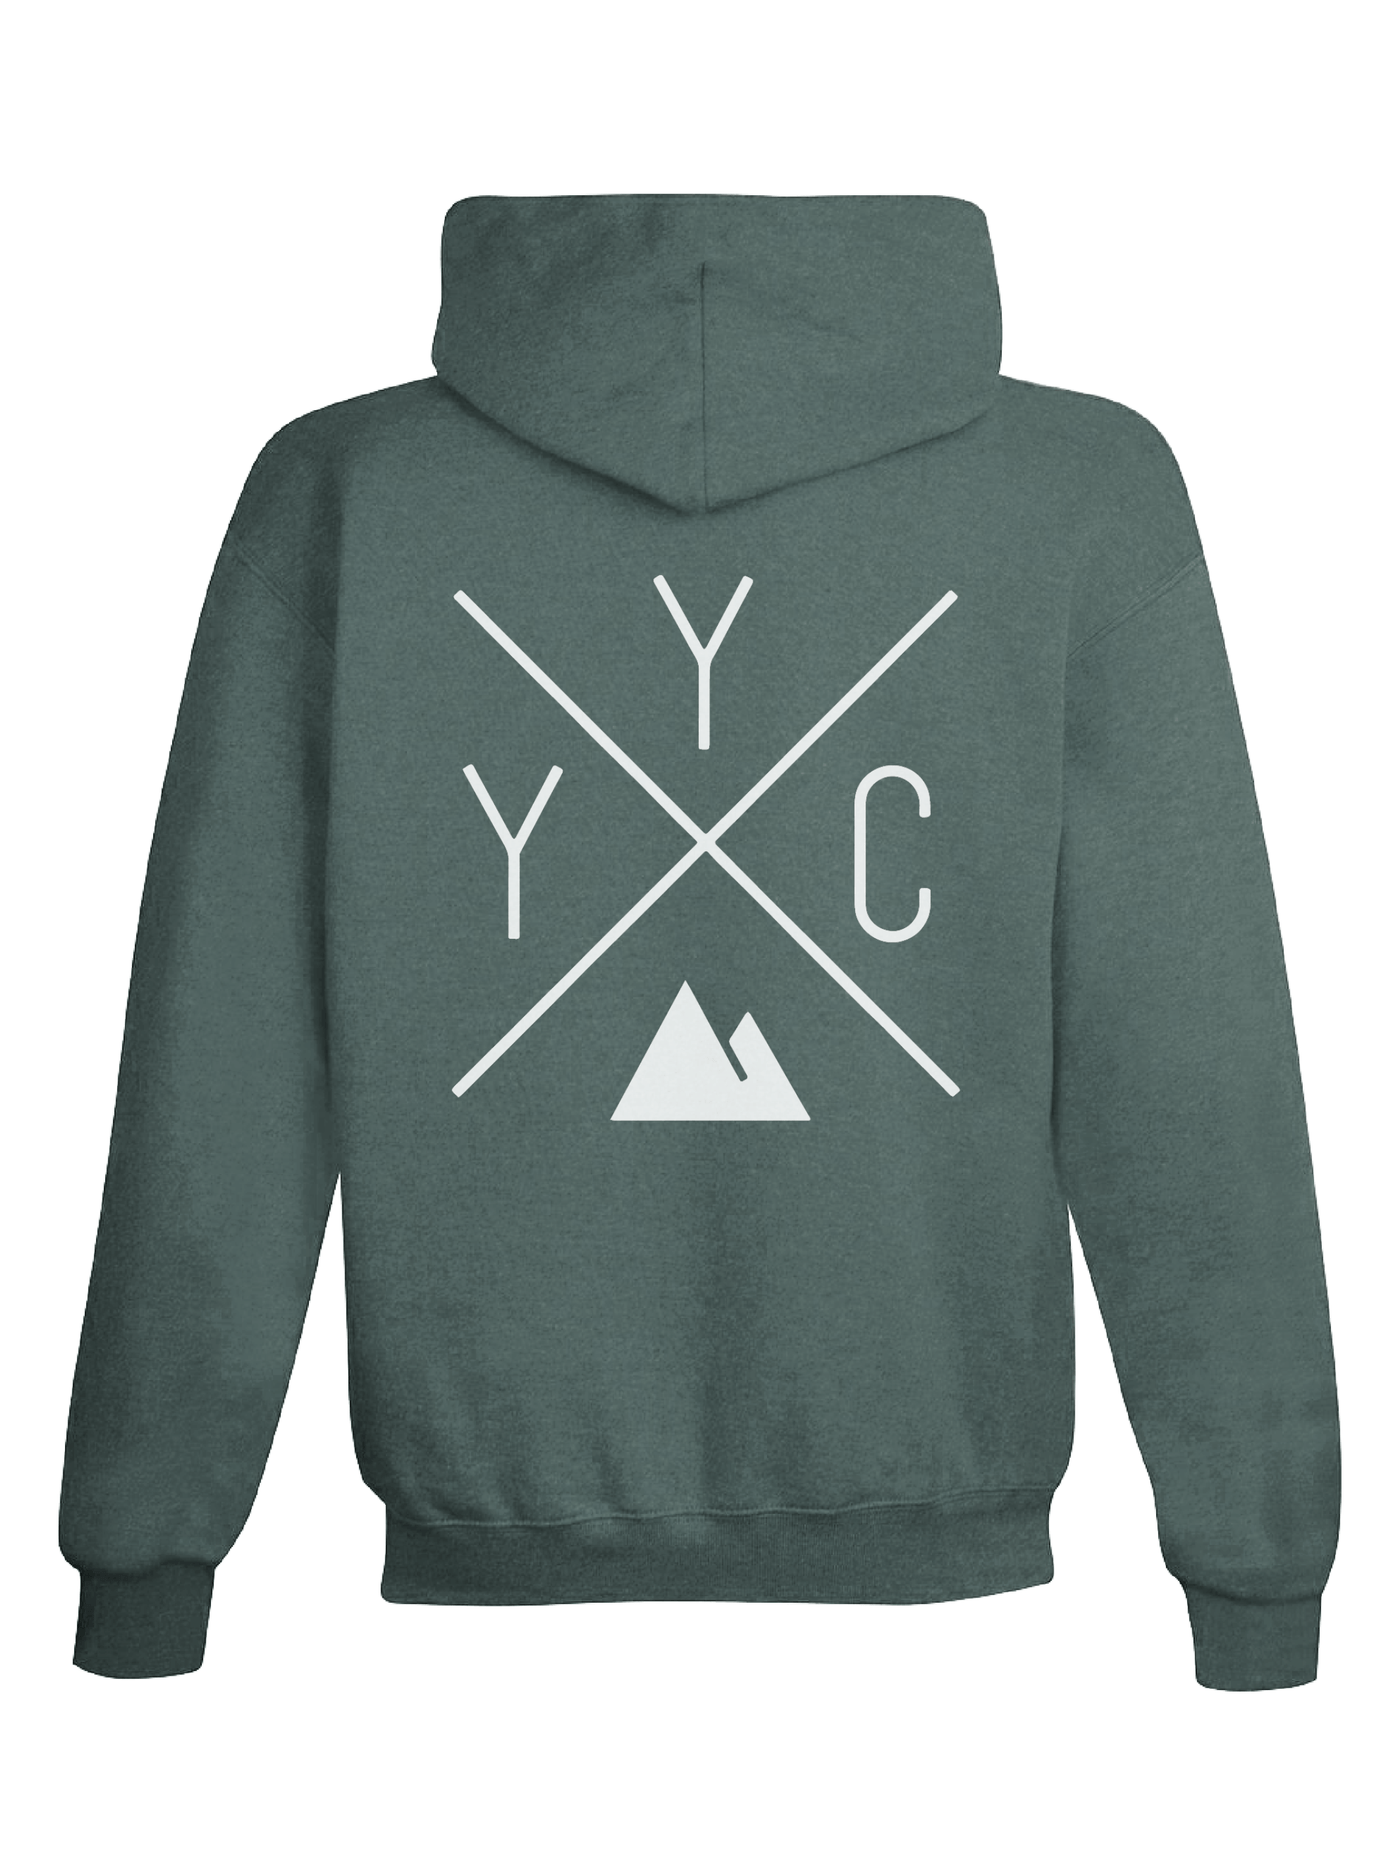 Back of the Local Laundry YYC Hoodie in Sage green, featuring the trademark YYC design exclusive to Local Laundry.